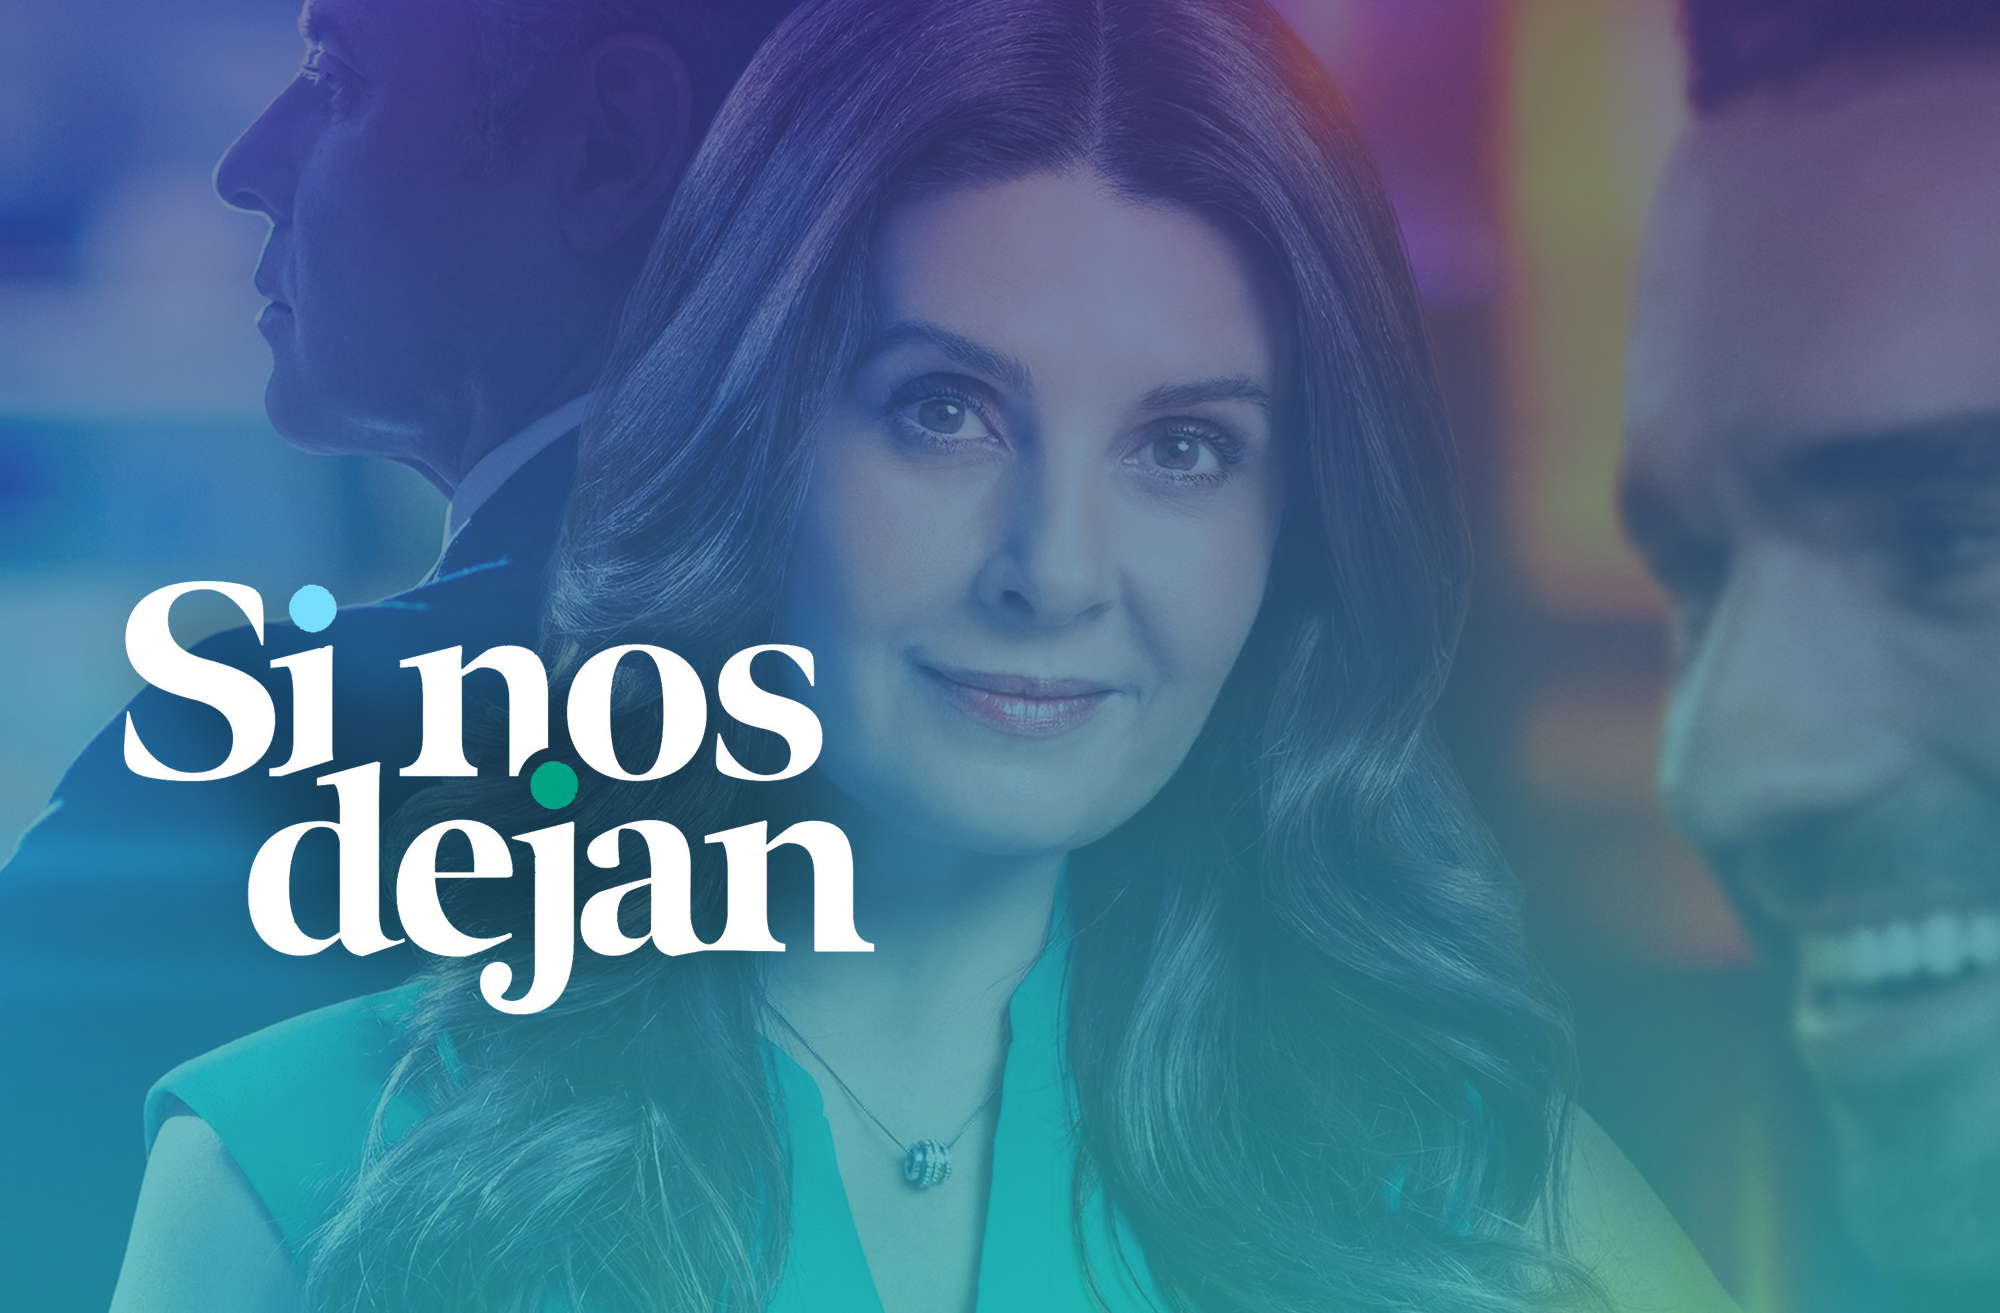 Producer of ‘Si Nos Dejan’ talks about the success of the telenovela by Univision after its end